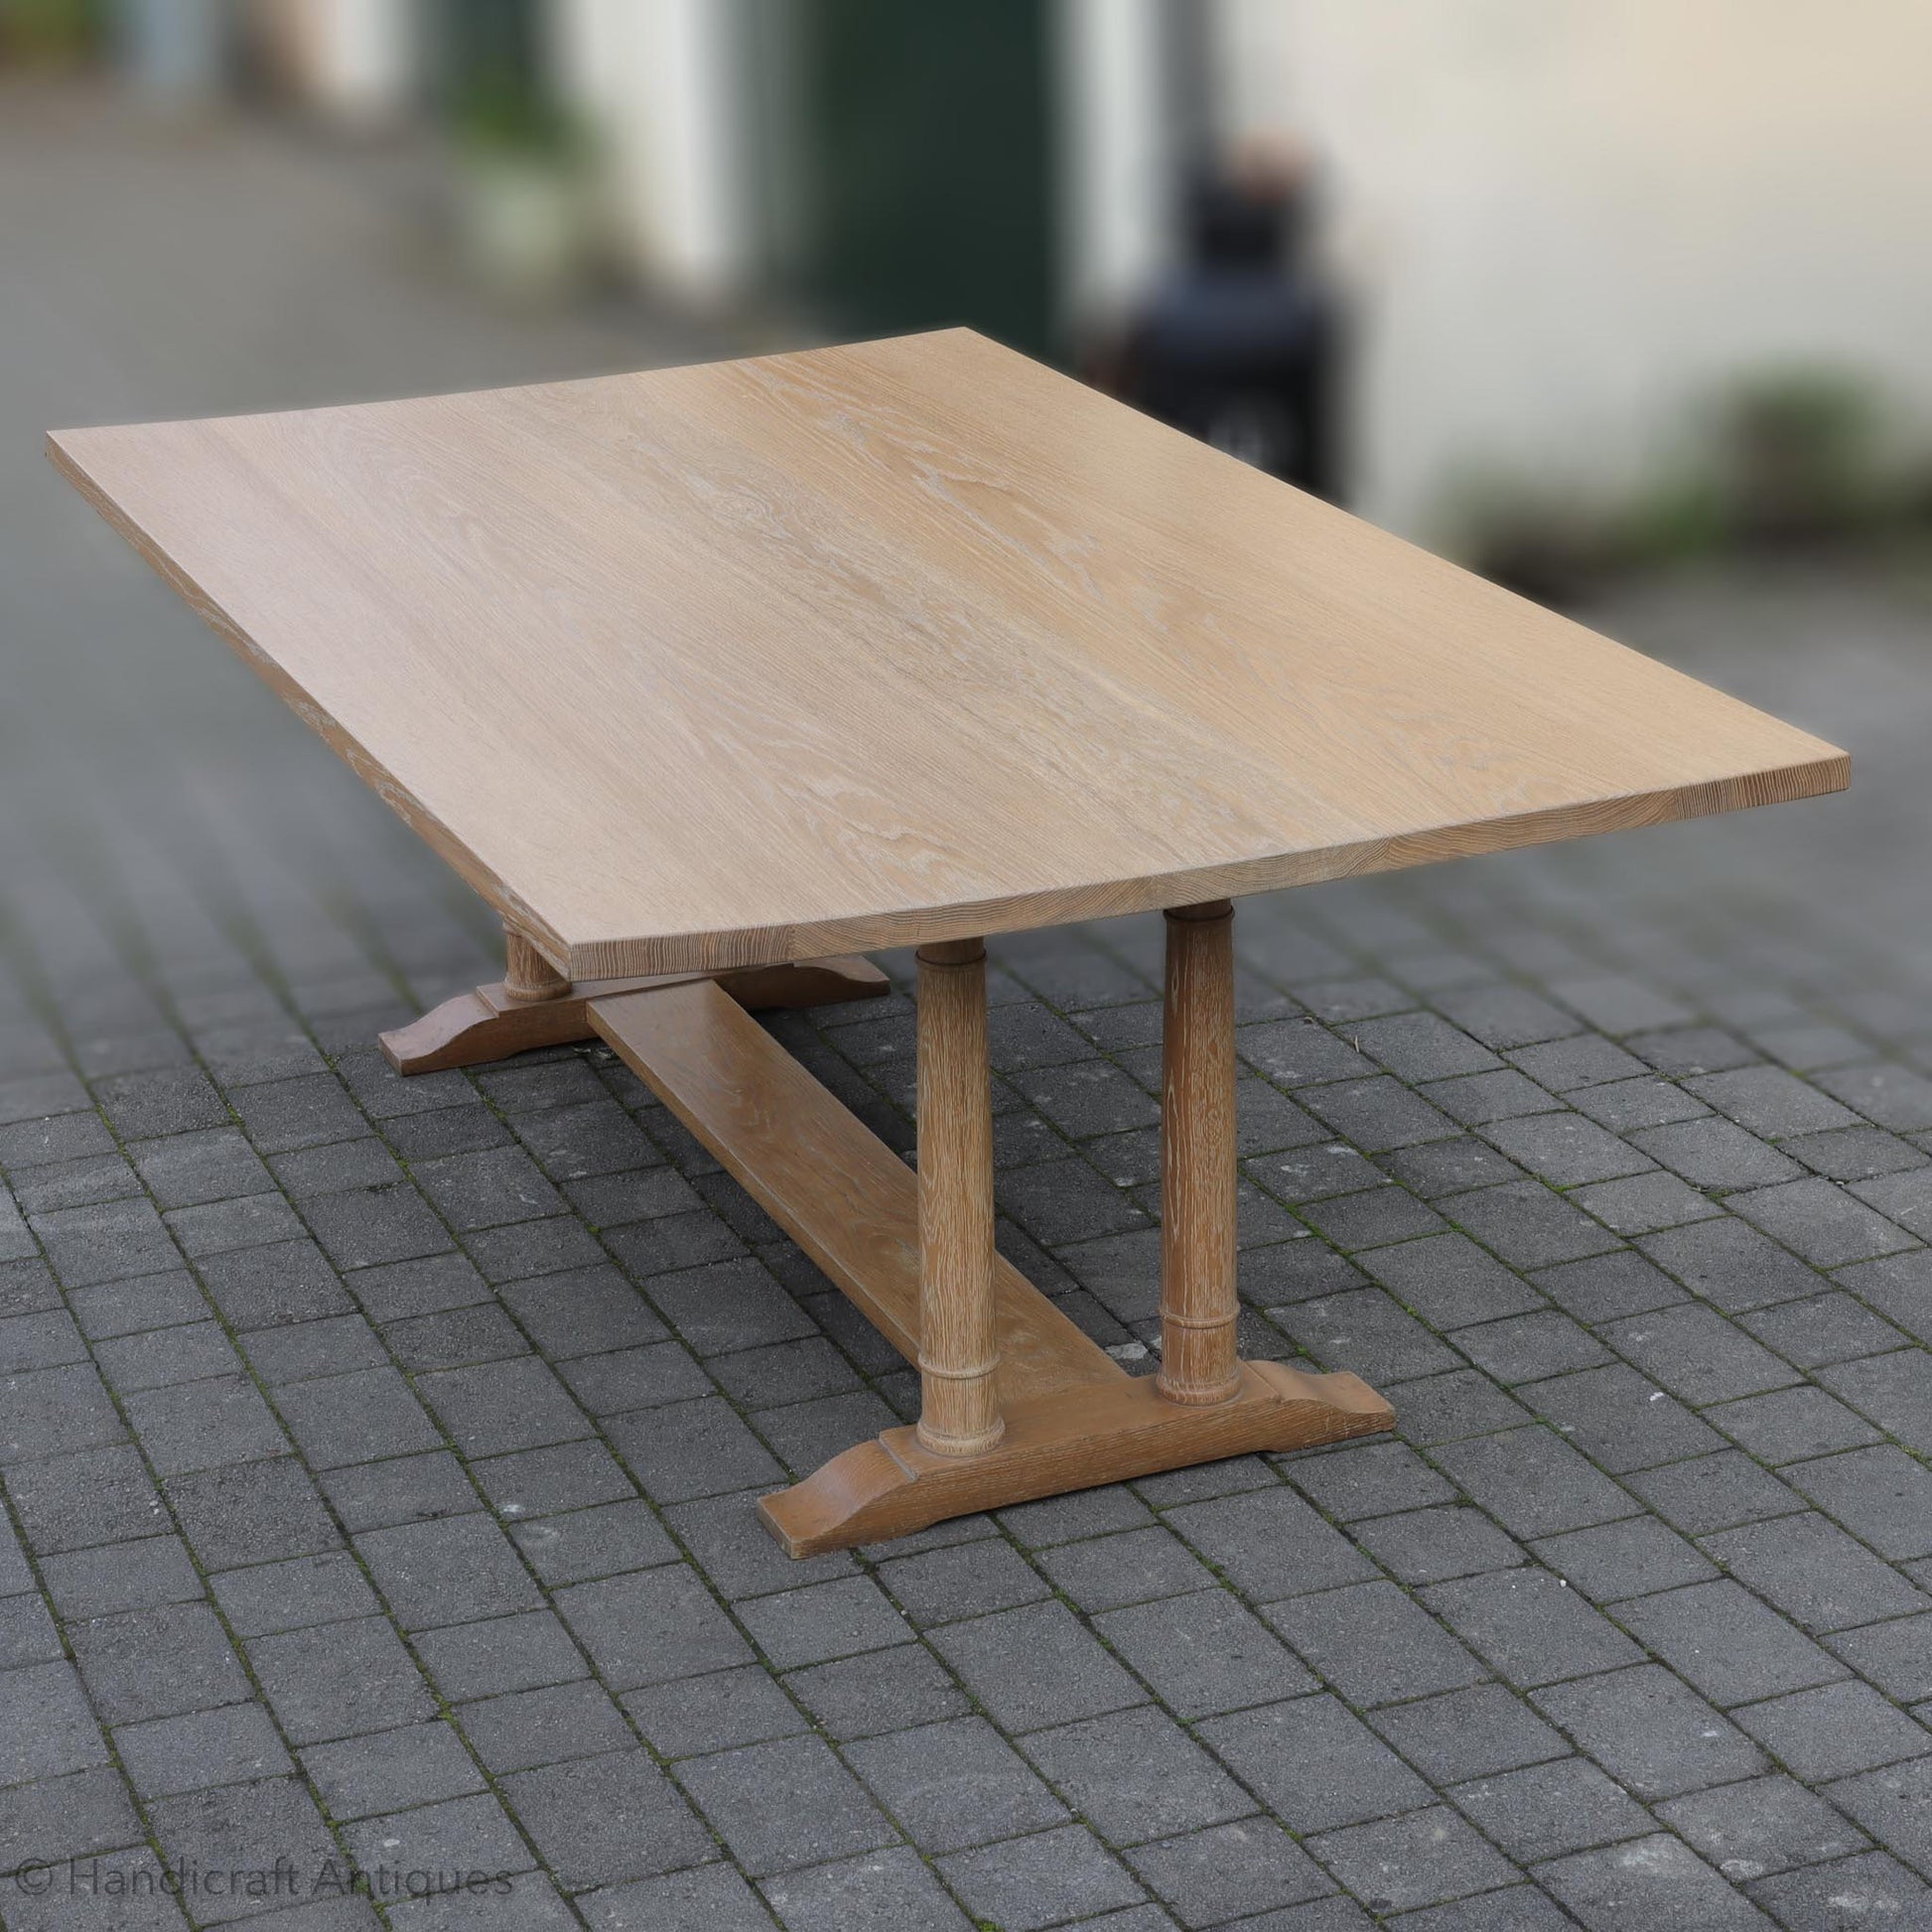 Heal and Co [Ambrose Heal] Tilden Arts & Crafts Cotswold School Oak Dining Table